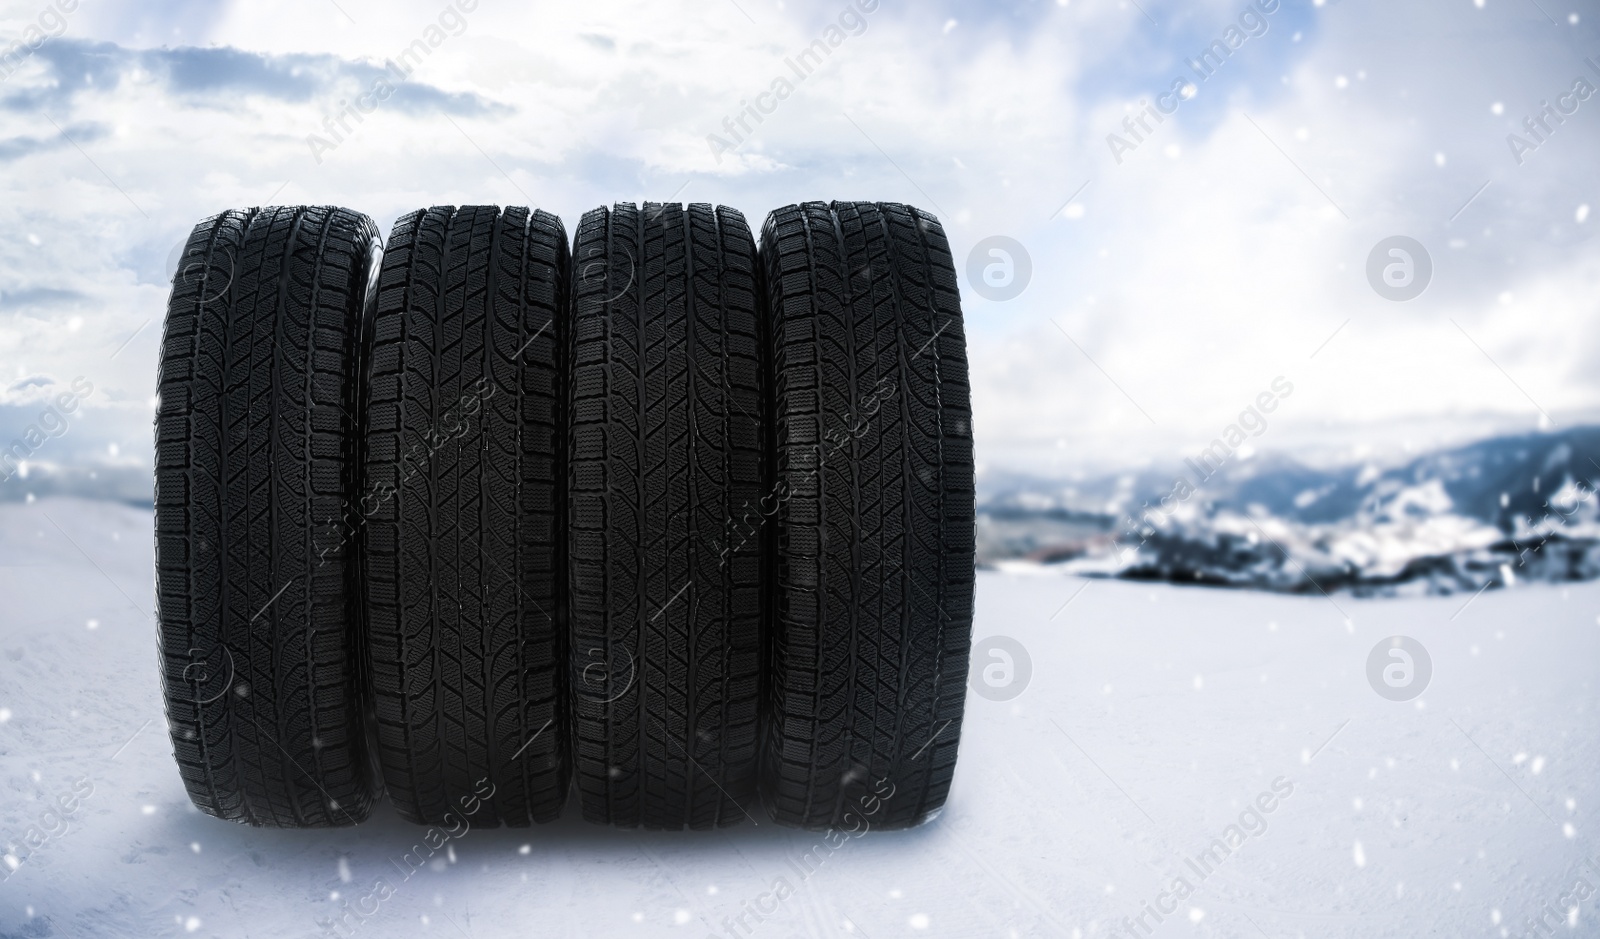 Image of Set of new winter tires outdoors on snow 